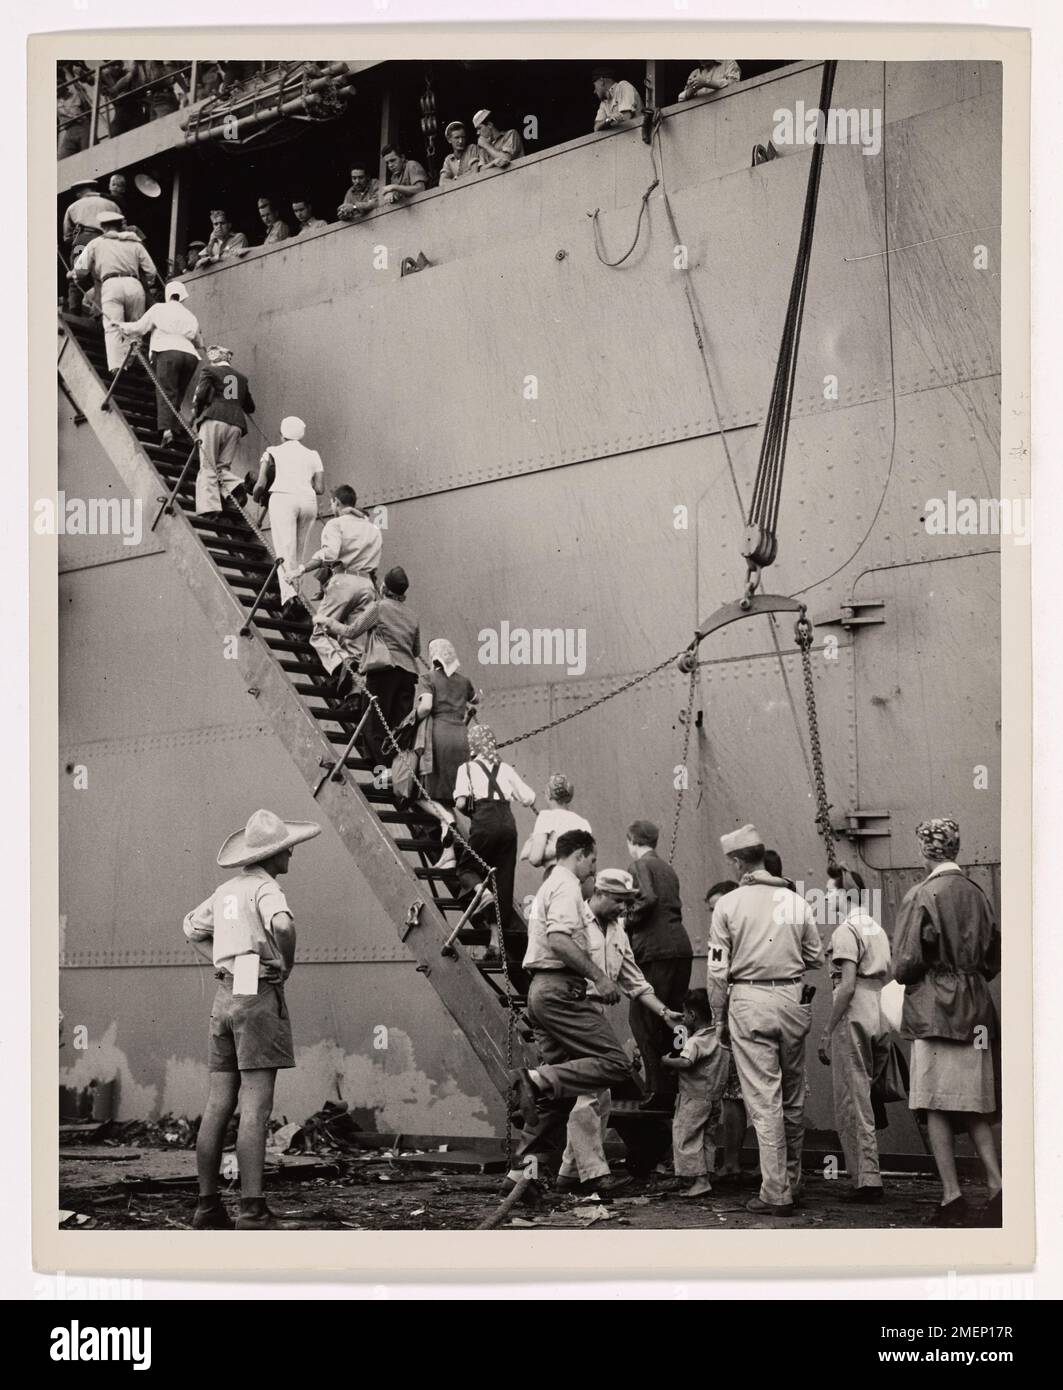 The Long Journey Home. Liberated from Jap prison camps I the Philippines, American and British internees climb the gangway to board the Coast Guard-manned troop transport which will carry them across the Pacific to the United States. Hundreds of men, women and children, who for three long years suffered from slow starvation in Los Banos and Santo Tomas prison camps, made the long journey to California after weeks of hospitalization and convalescence under protection of American Forces occupying the Manila area. Stock Photo